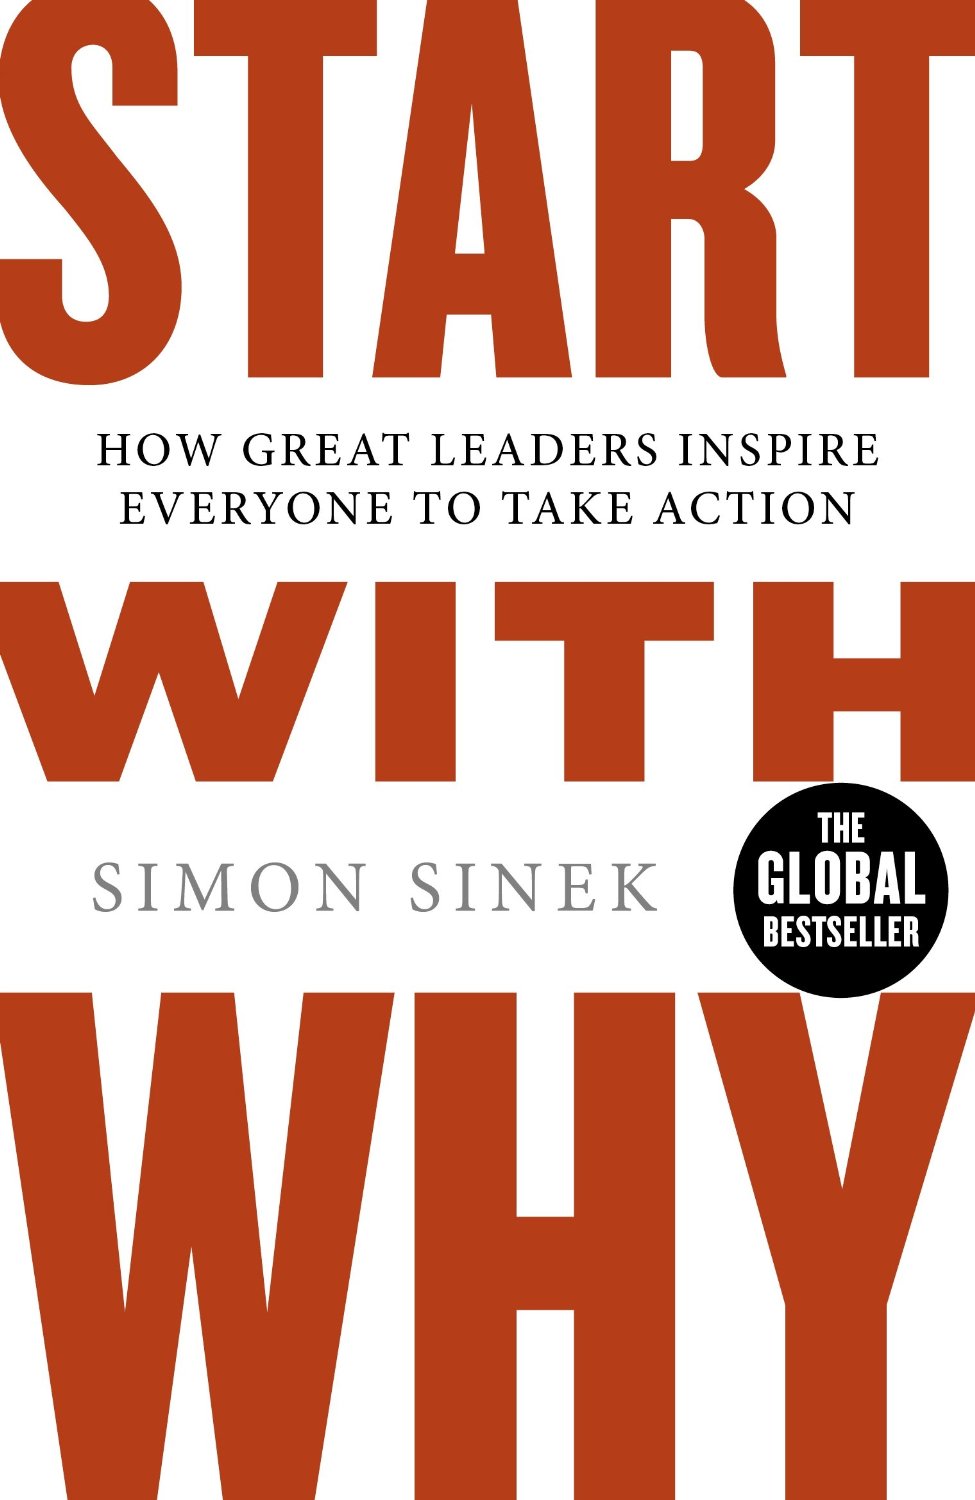 Start With Why (by Simon Sinek)